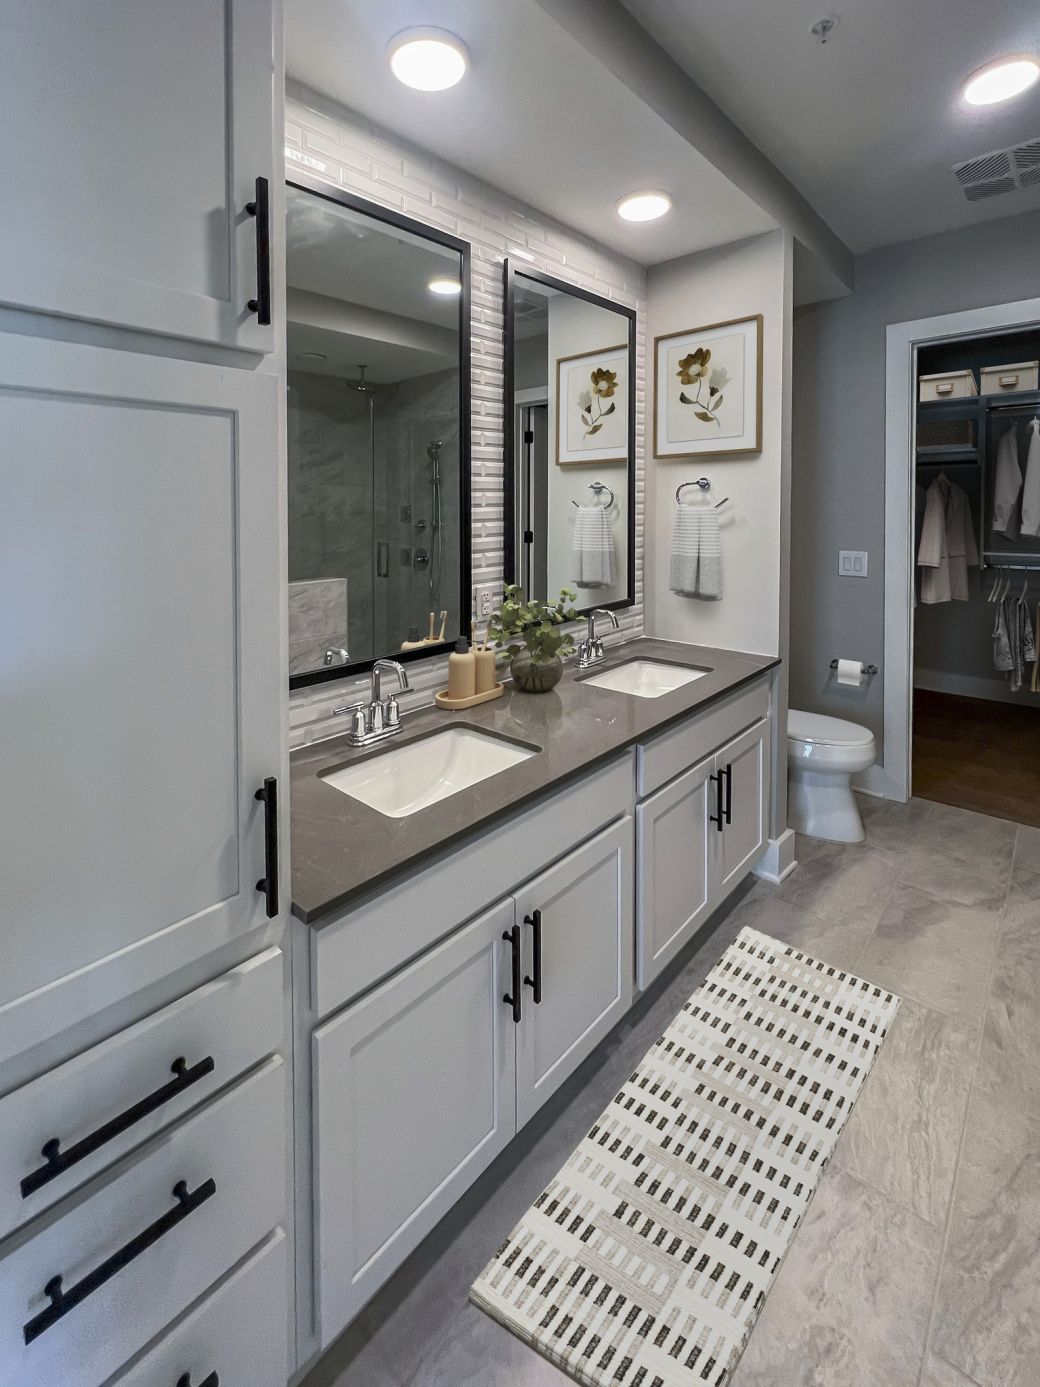 Carraway Village spacious bathroom with double sinks, walk-in closet, and built-in storage